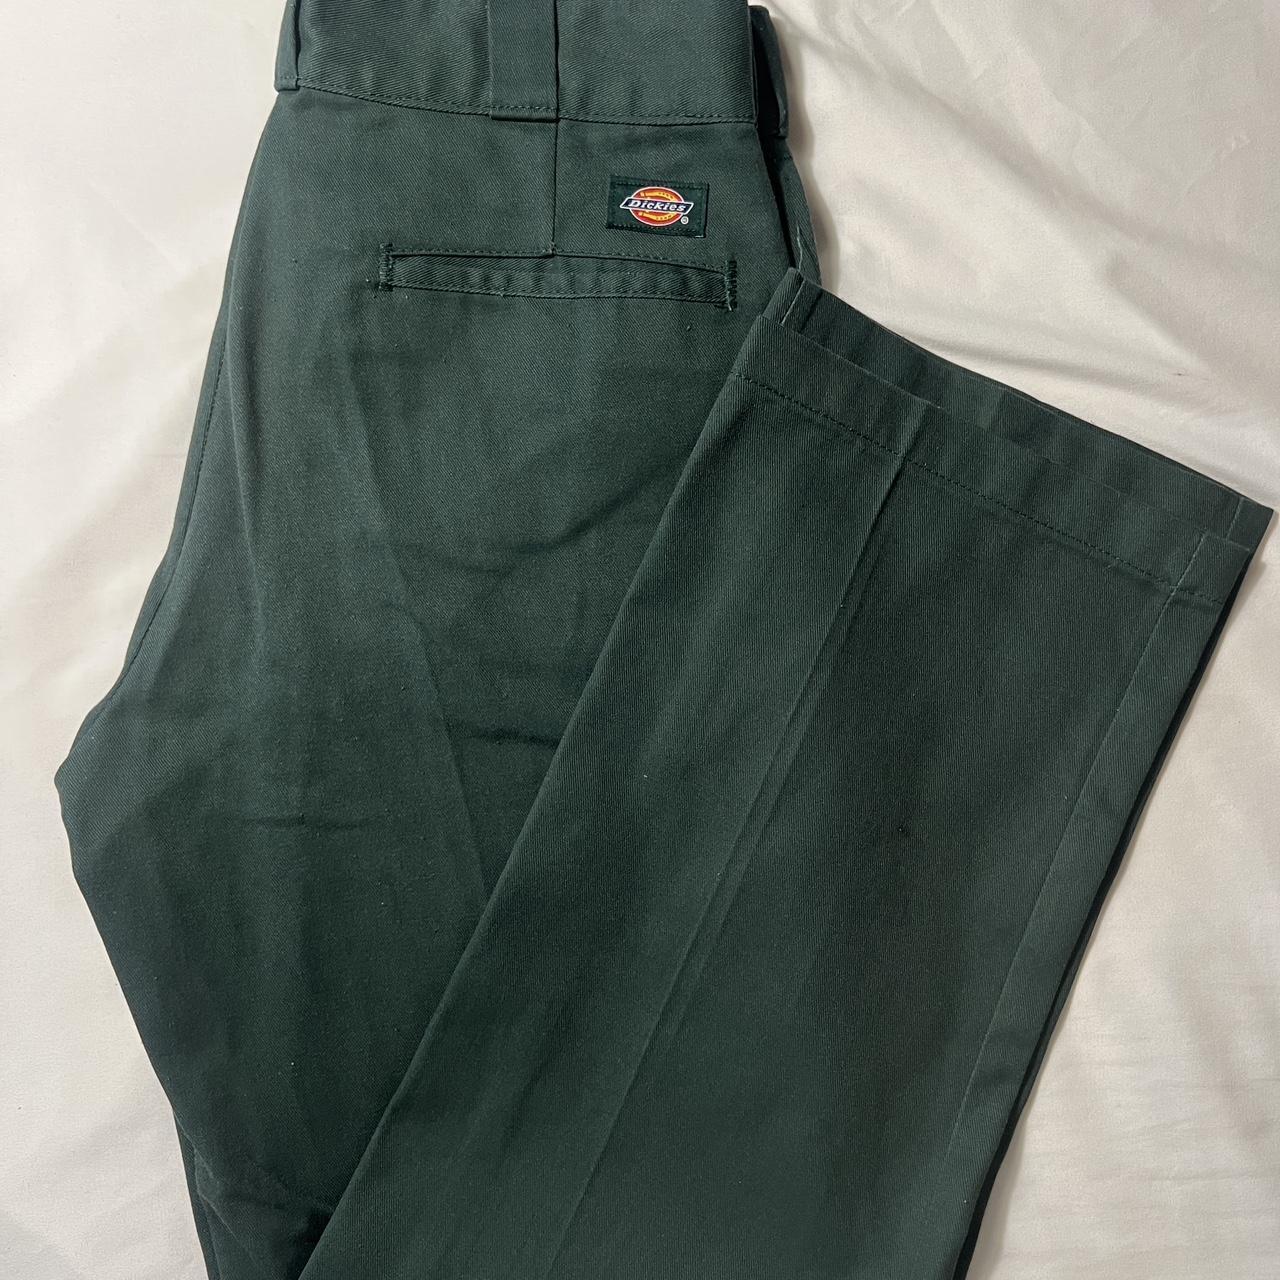 Green Dickies 874 original fit size 30x32. Condition... - Depop